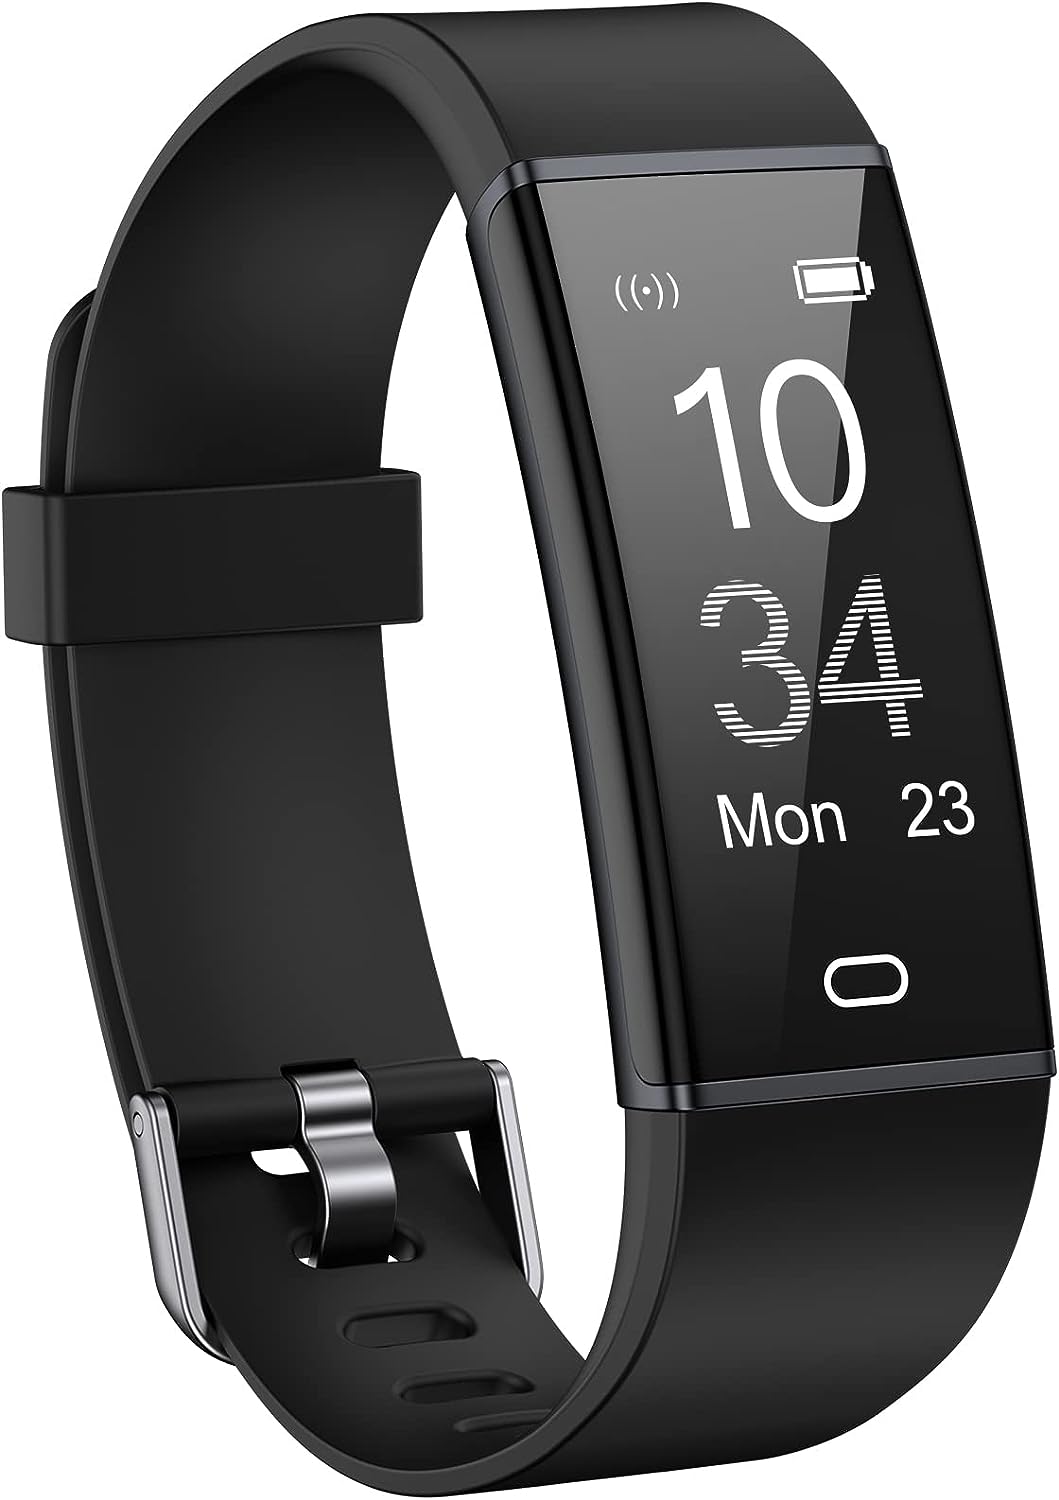 LIVIKEY Fitness Tracker Watch with Heart Rate Monitor, [...]